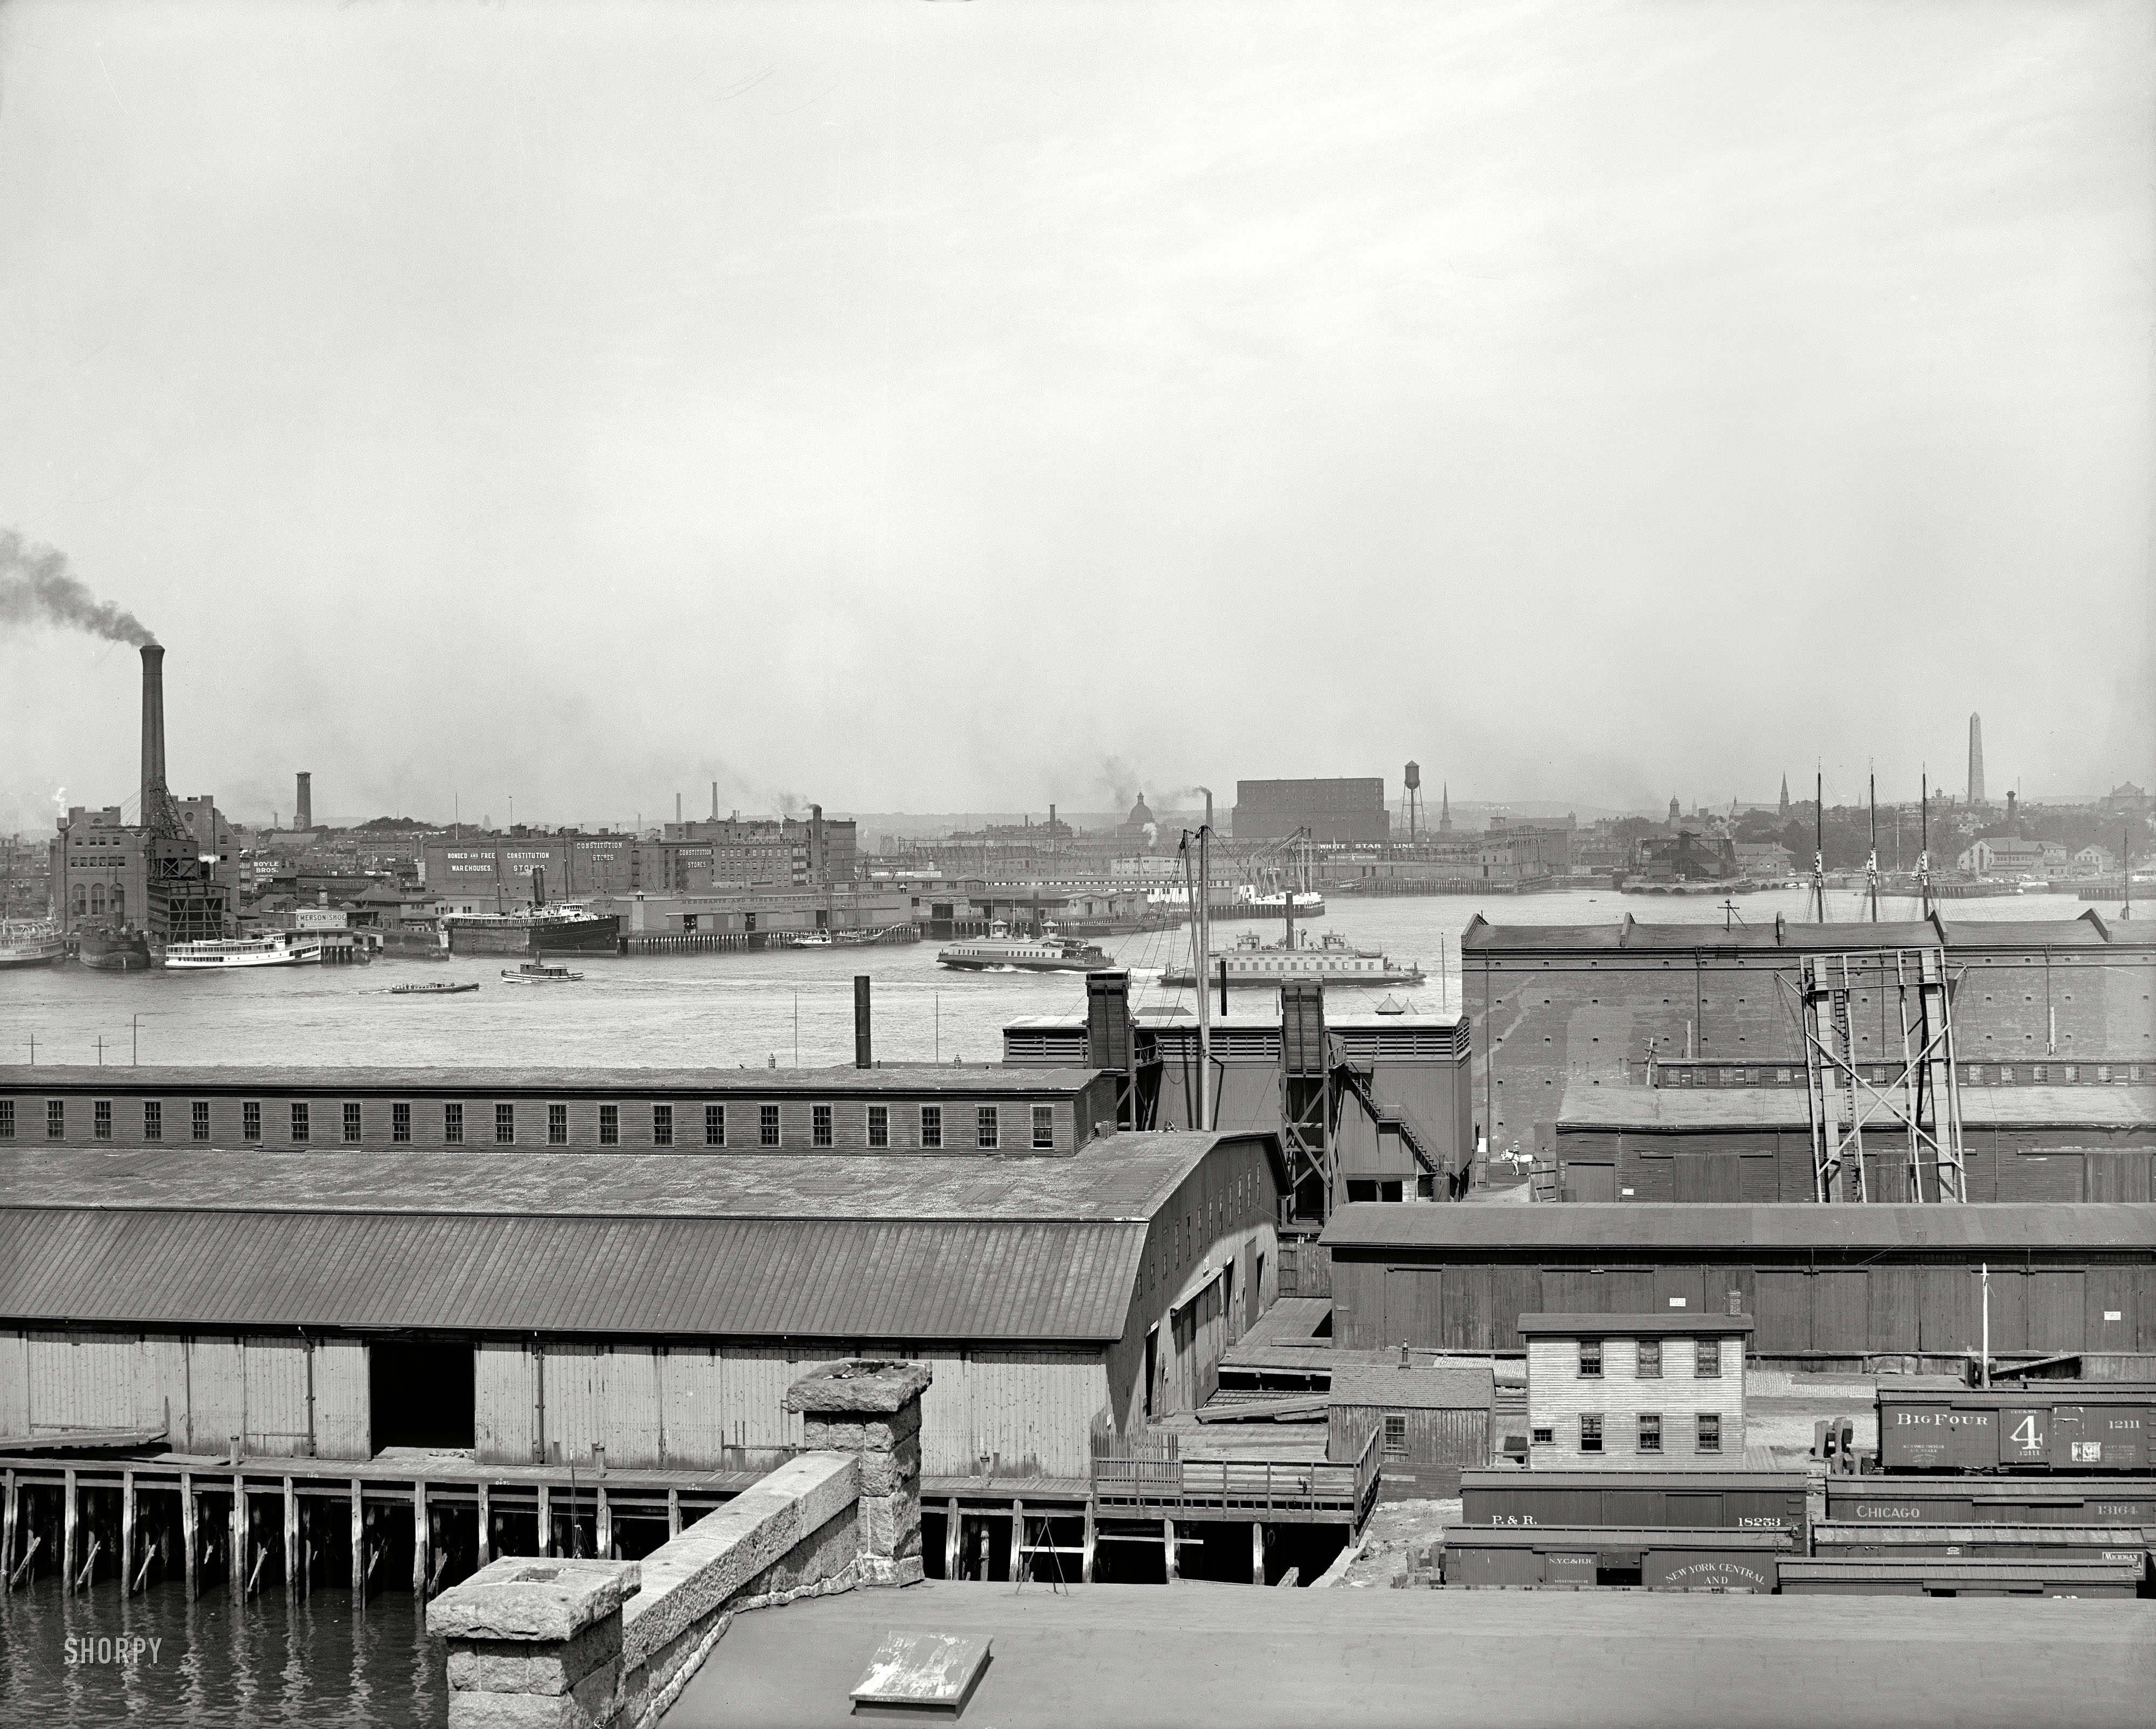 Circa 1906. "Boston Harbor from East Boston." Our second glimpse at this bustling transport hub. 8x10 inch glass negative. View full size.